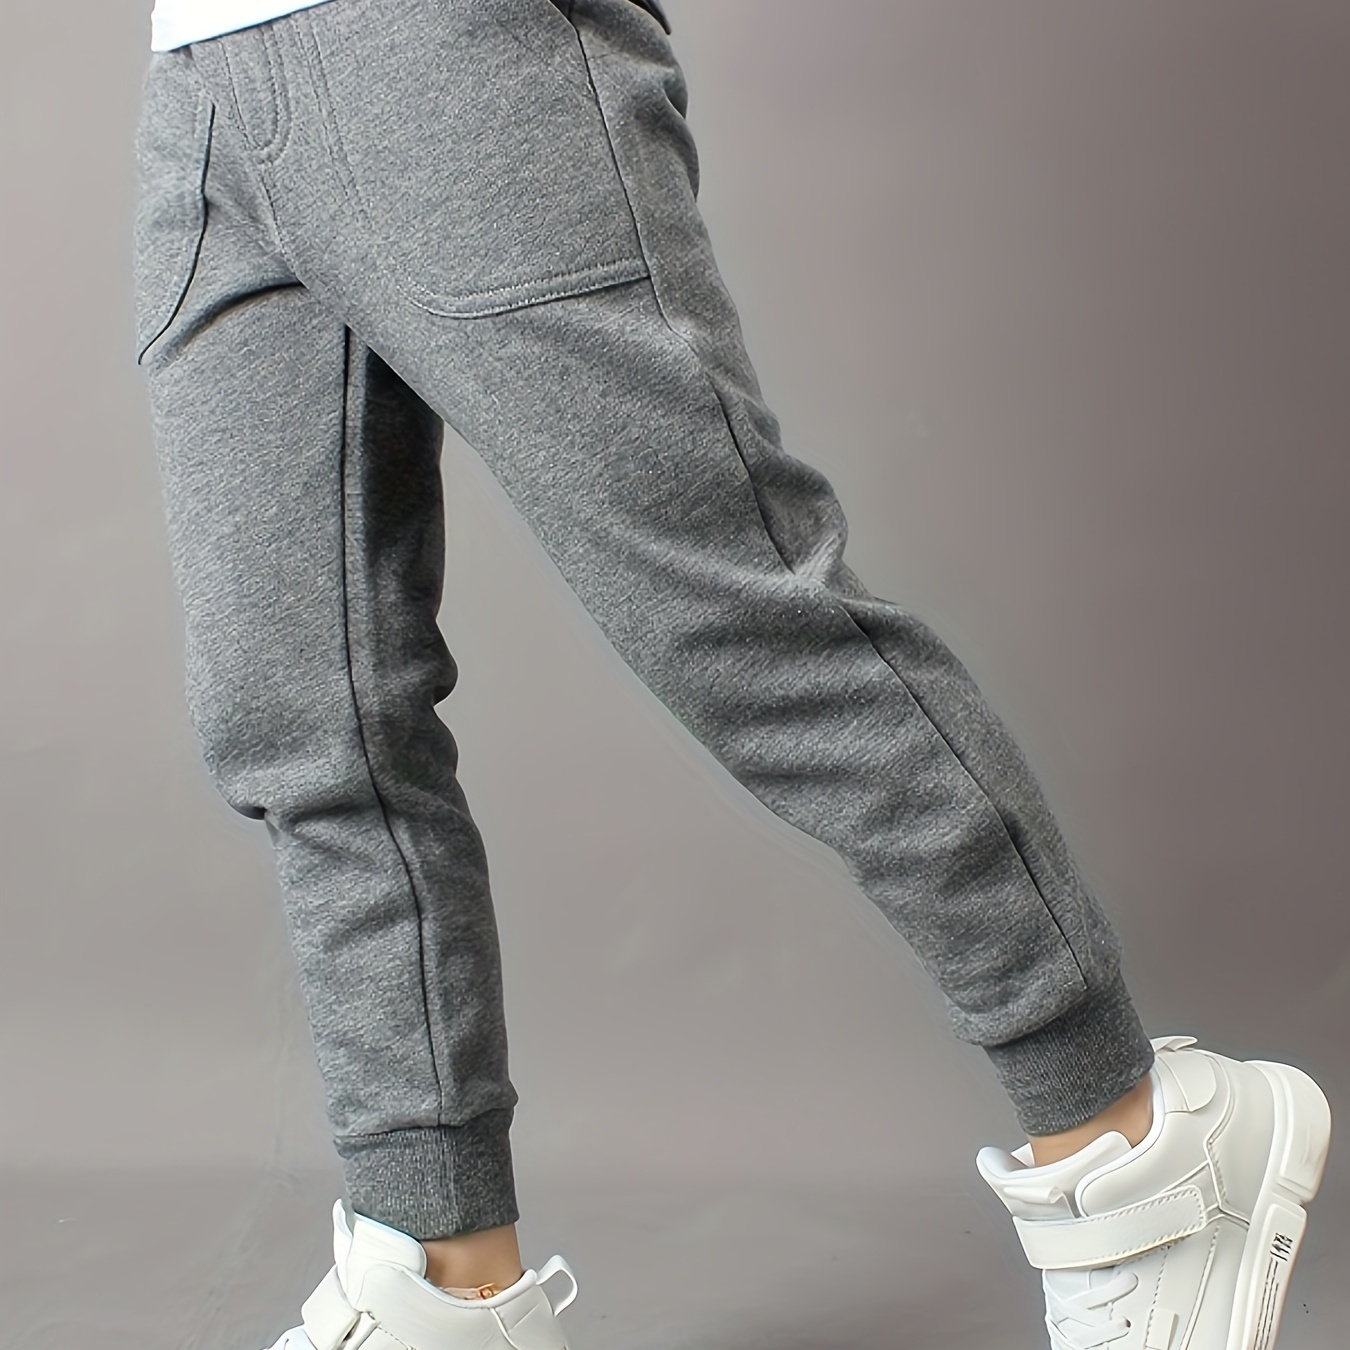 

Kids Boys Athletic Sweatpants, Grey Joggers With Elastic Waistband, Casual Sport Style Long Pants For Everyday Wear